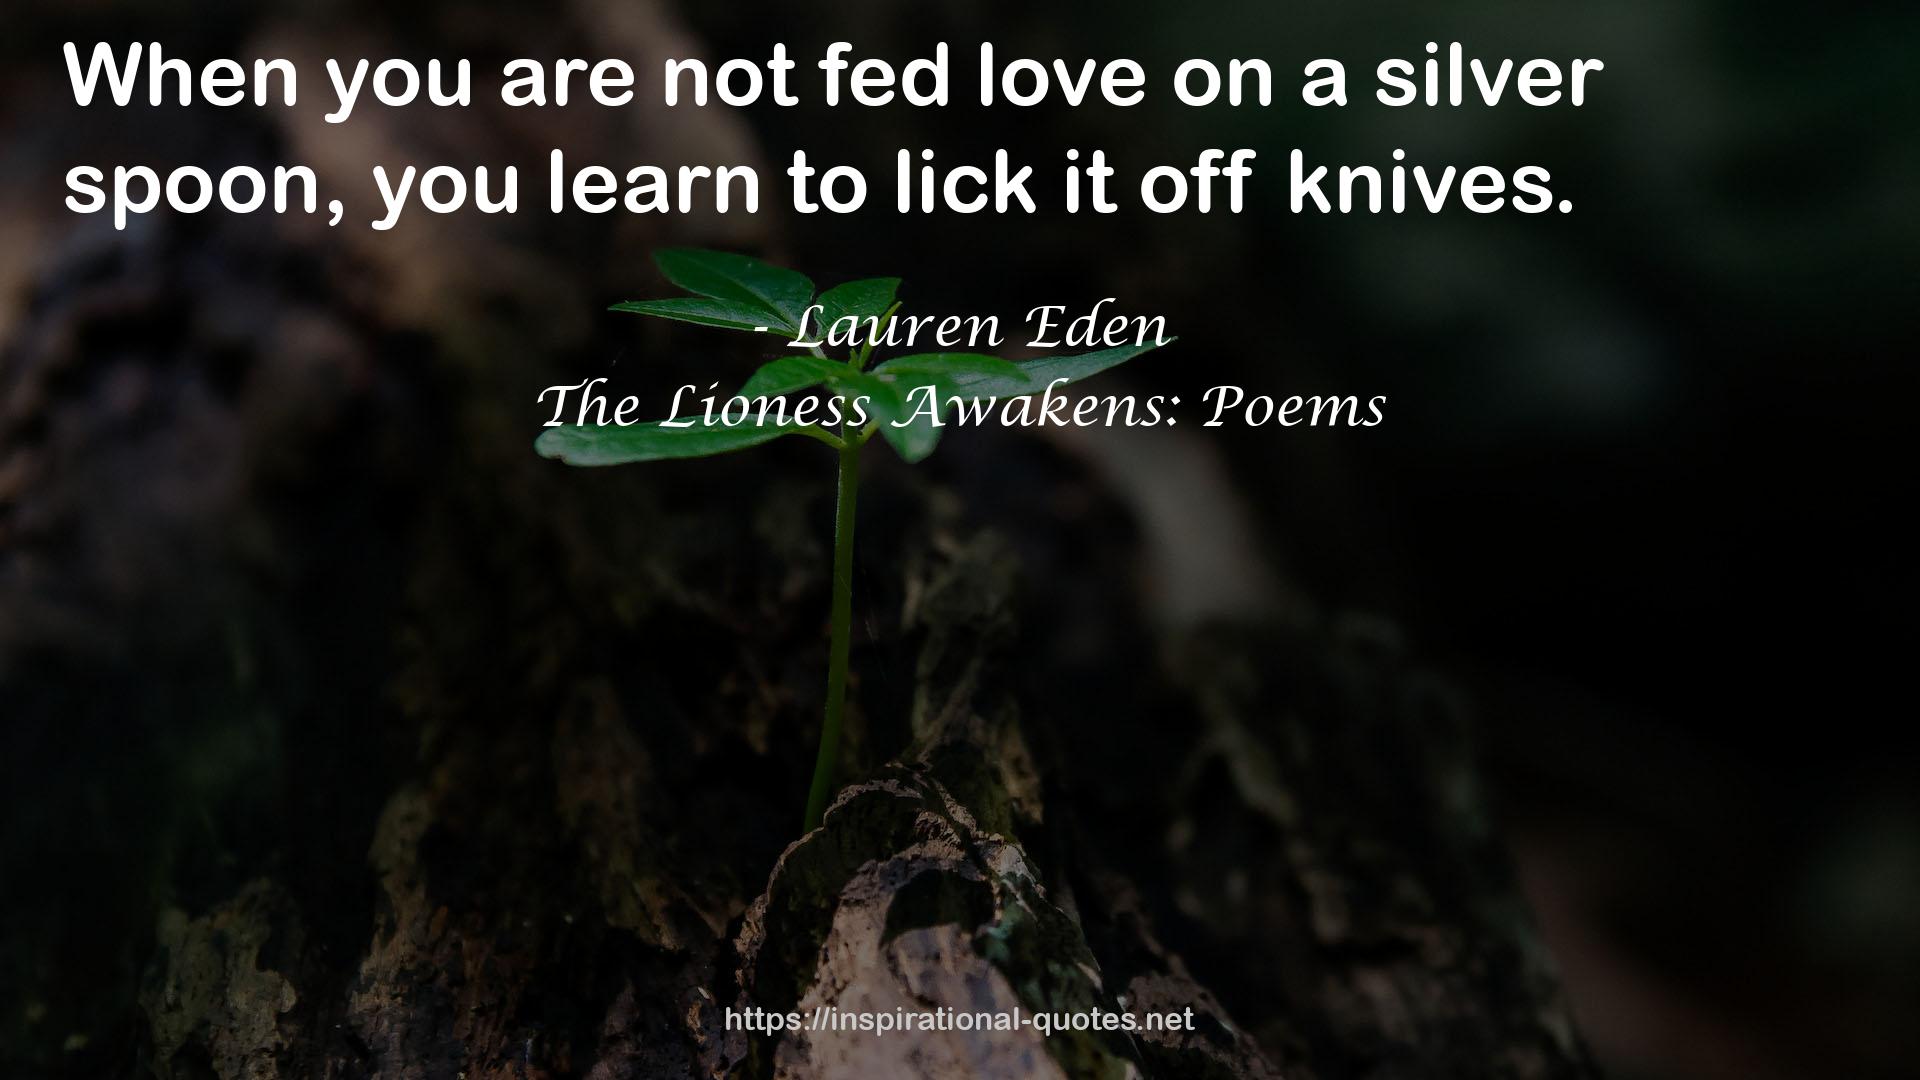 The Lioness Awakens: Poems QUOTES